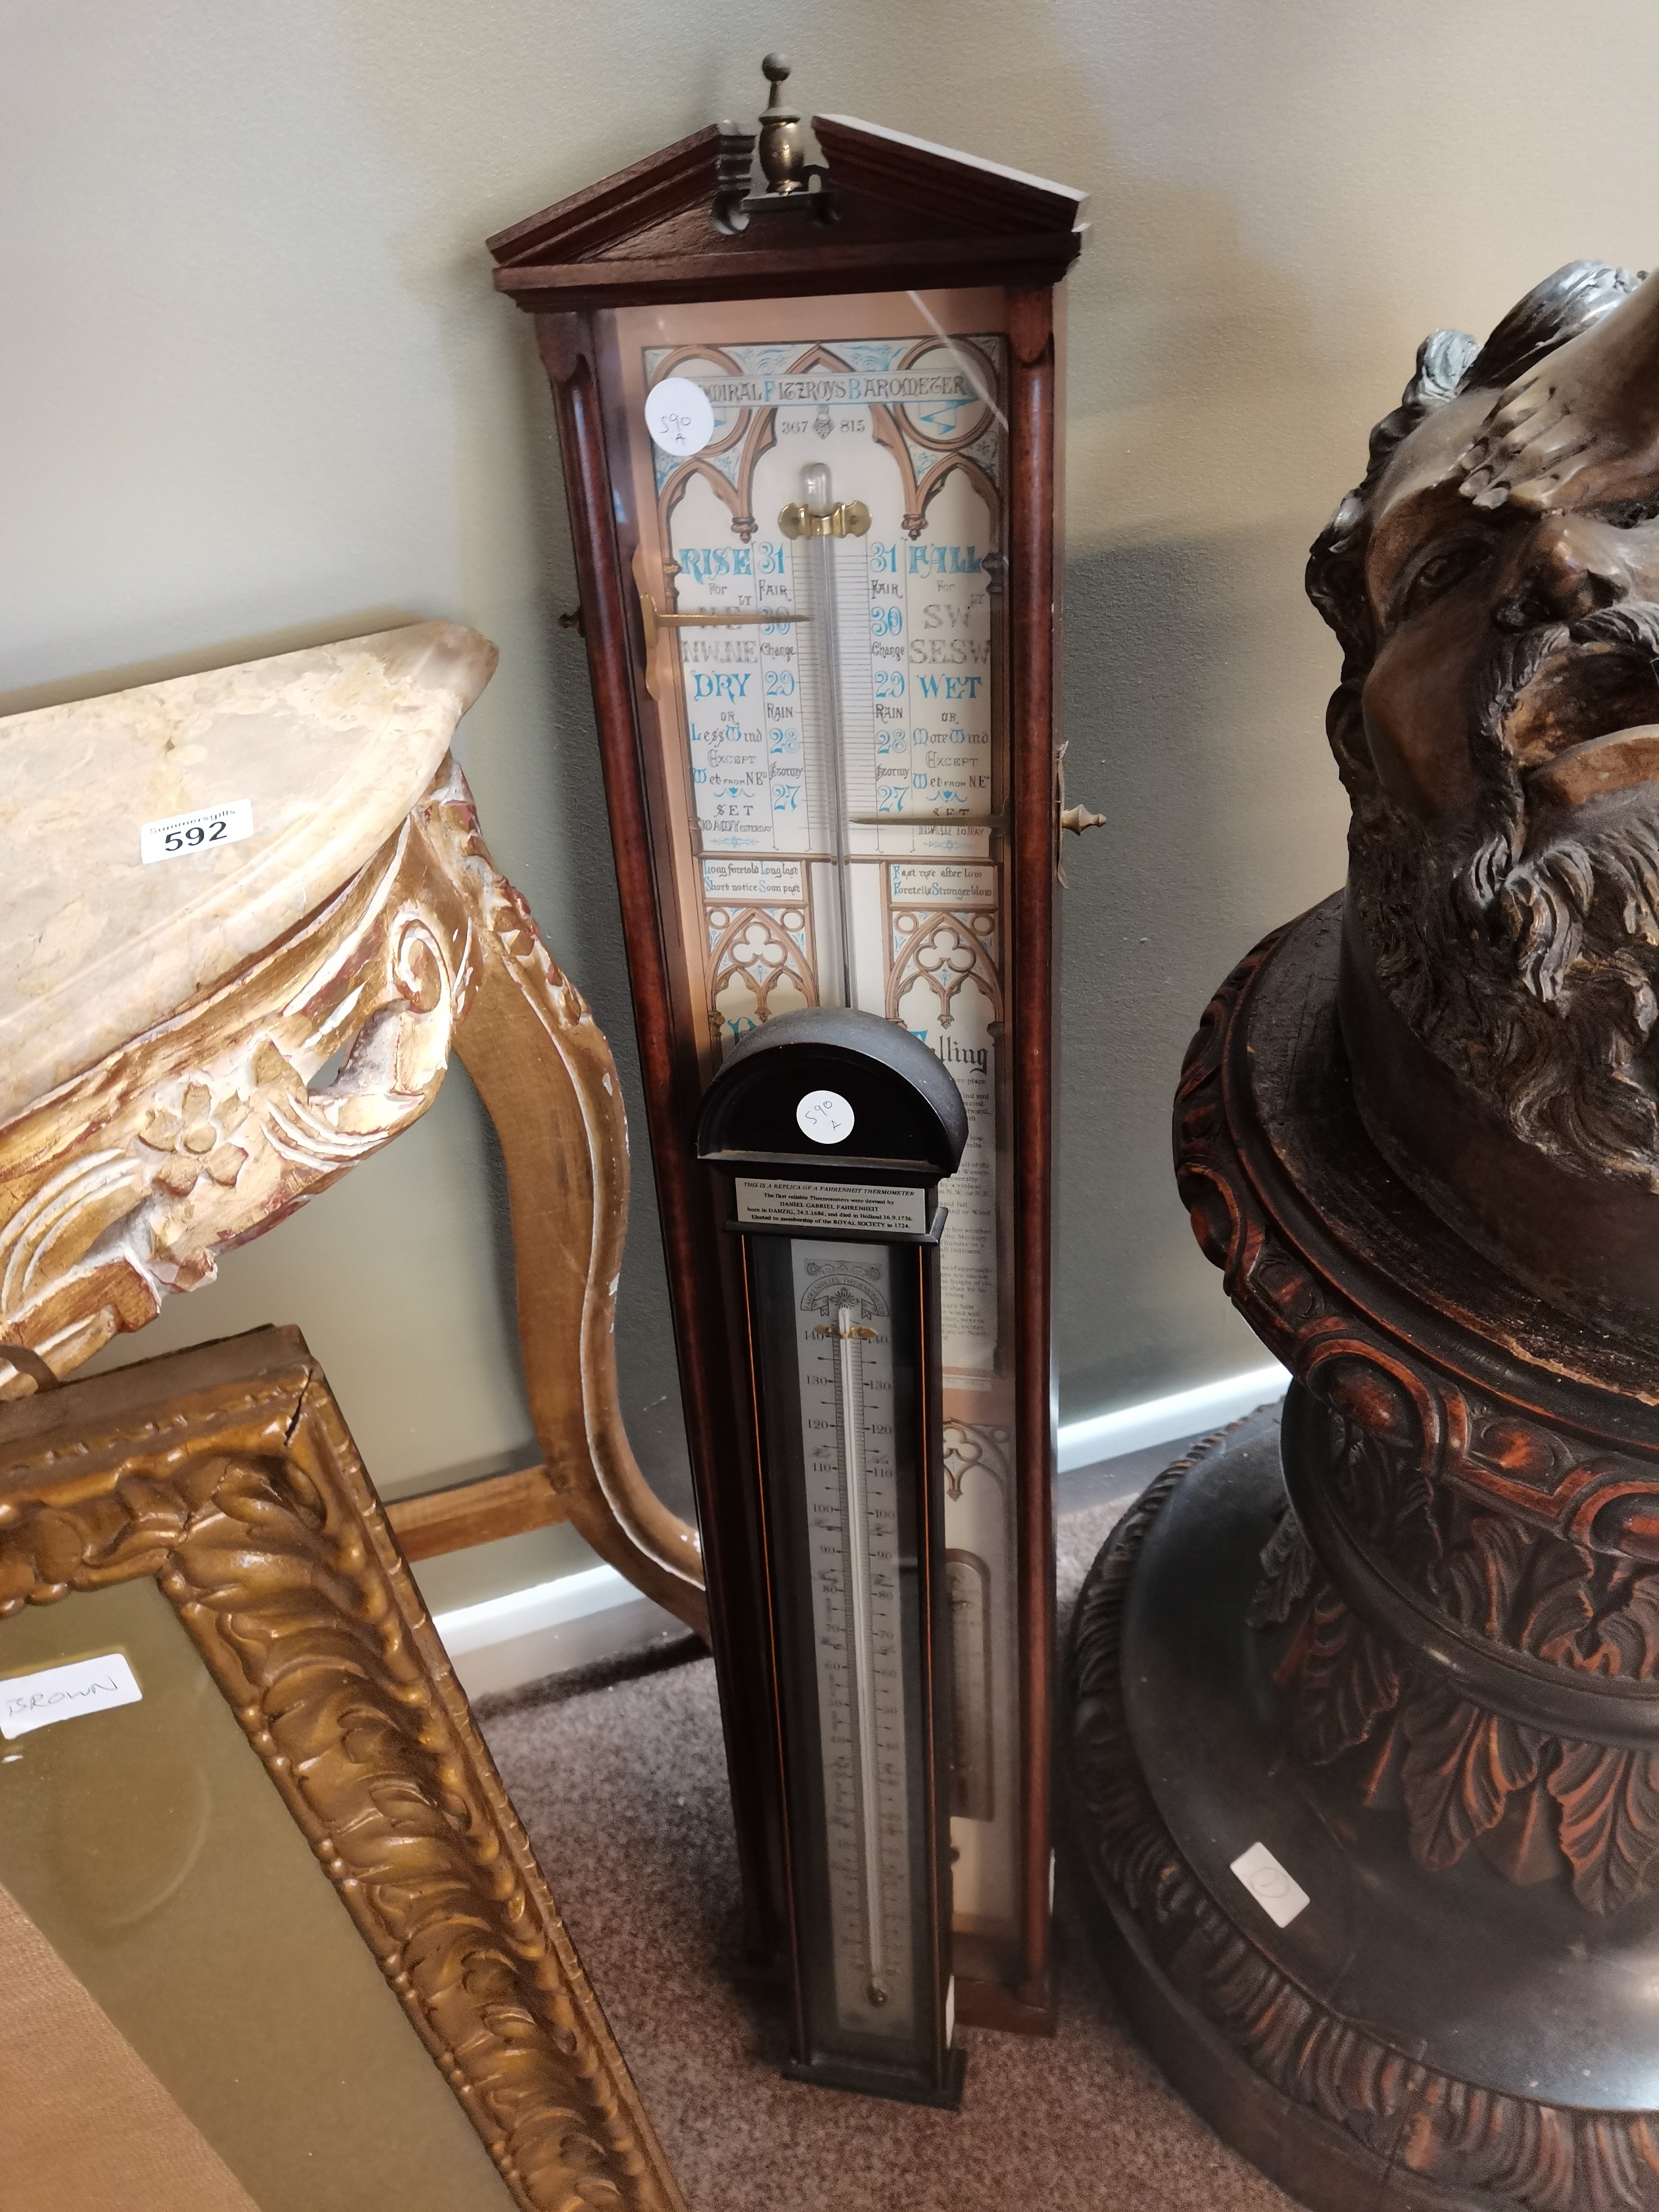 Admiral Fitzerod barometer plus one other